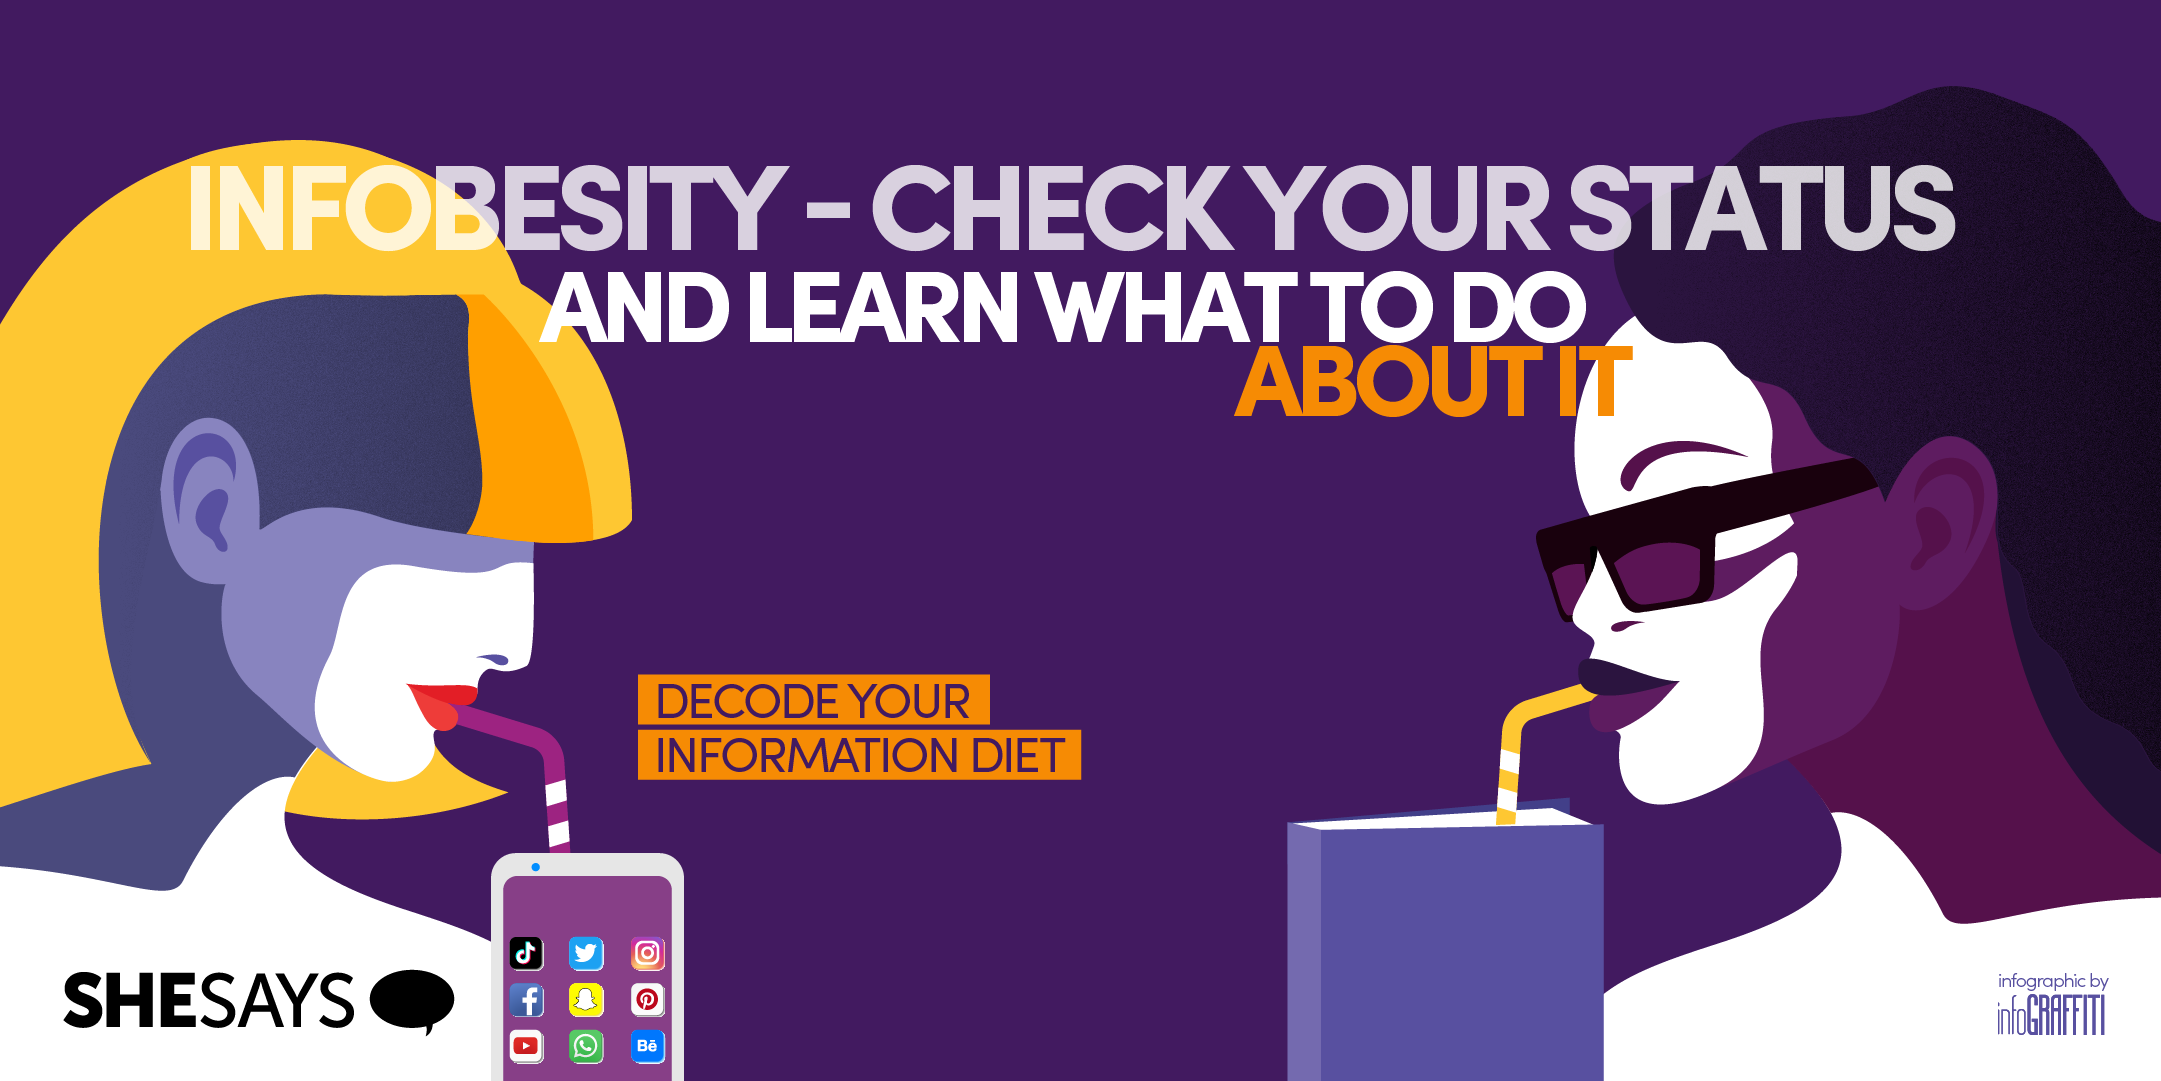 Infobesity: how to check your status and decode your information diet